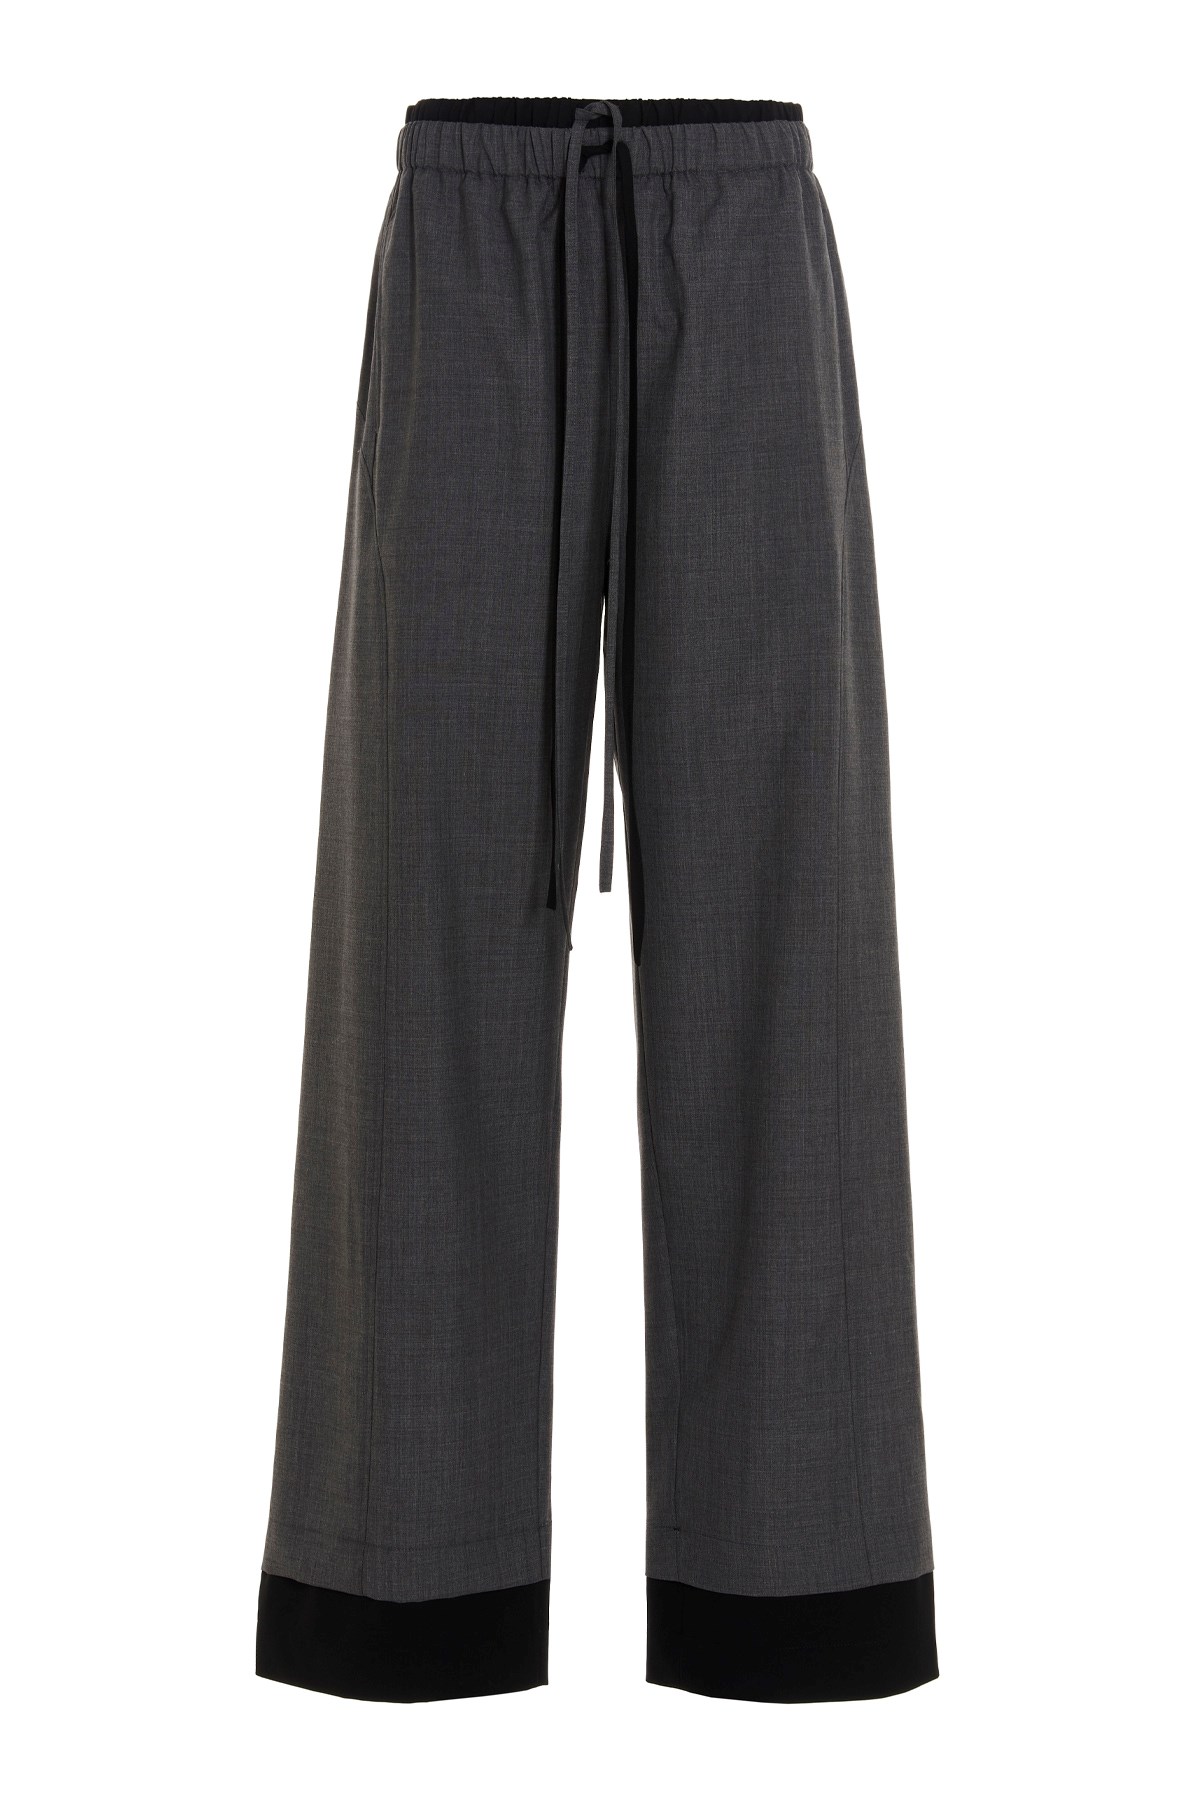 VIEN Double Fabric Trousers